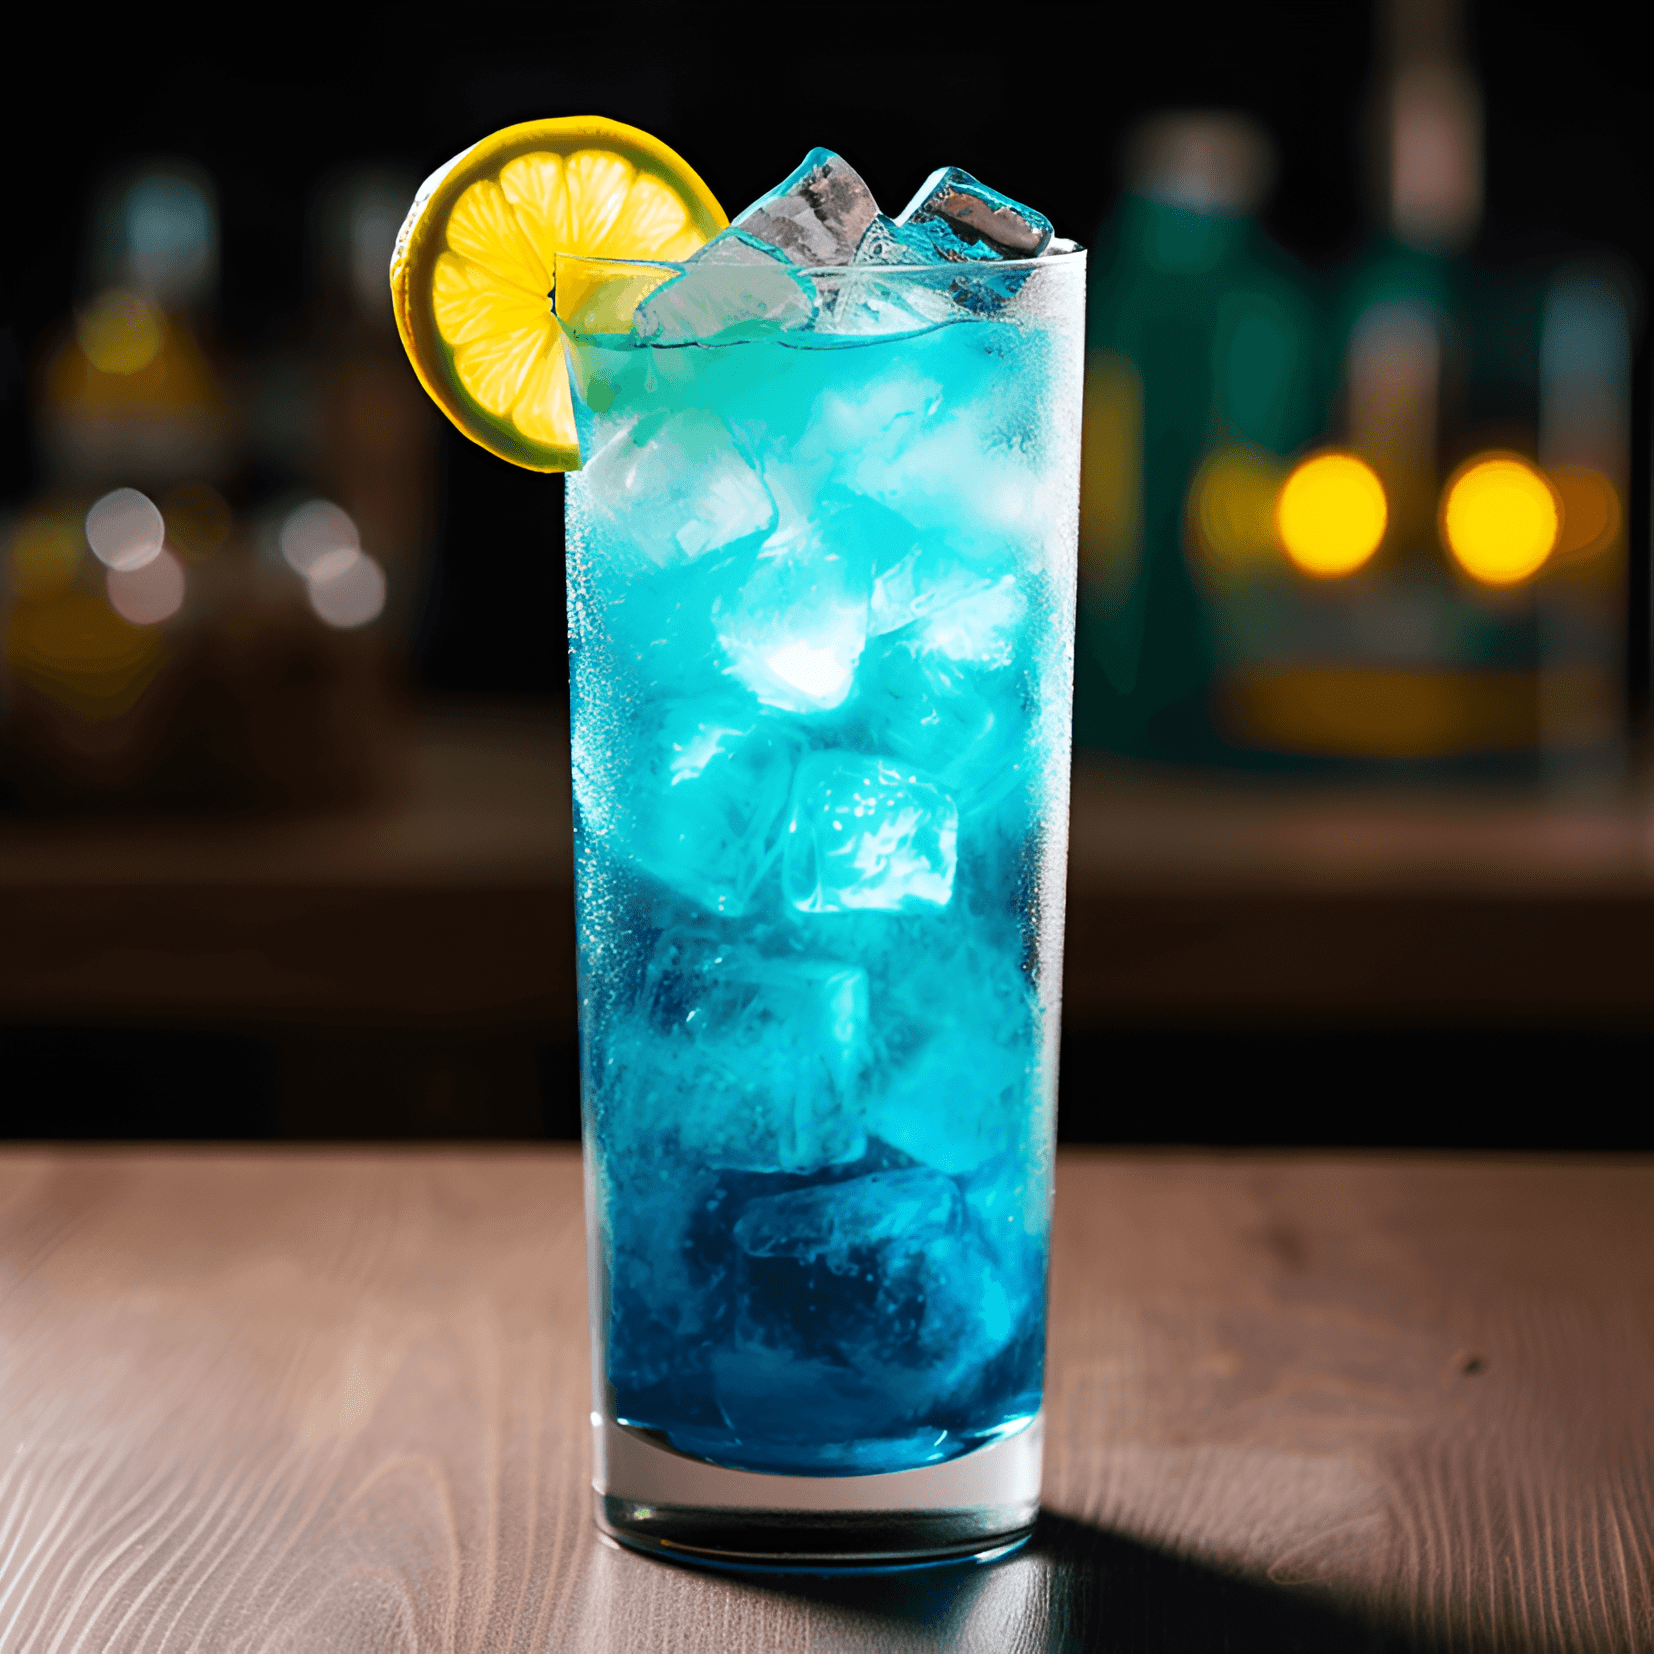 Ocean Breeze Cocktail Recipe - The Ocean Breeze cocktail has a fruity, sweet, and slightly tangy taste. It is light and refreshing, with a hint of citrus and tropical flavors.